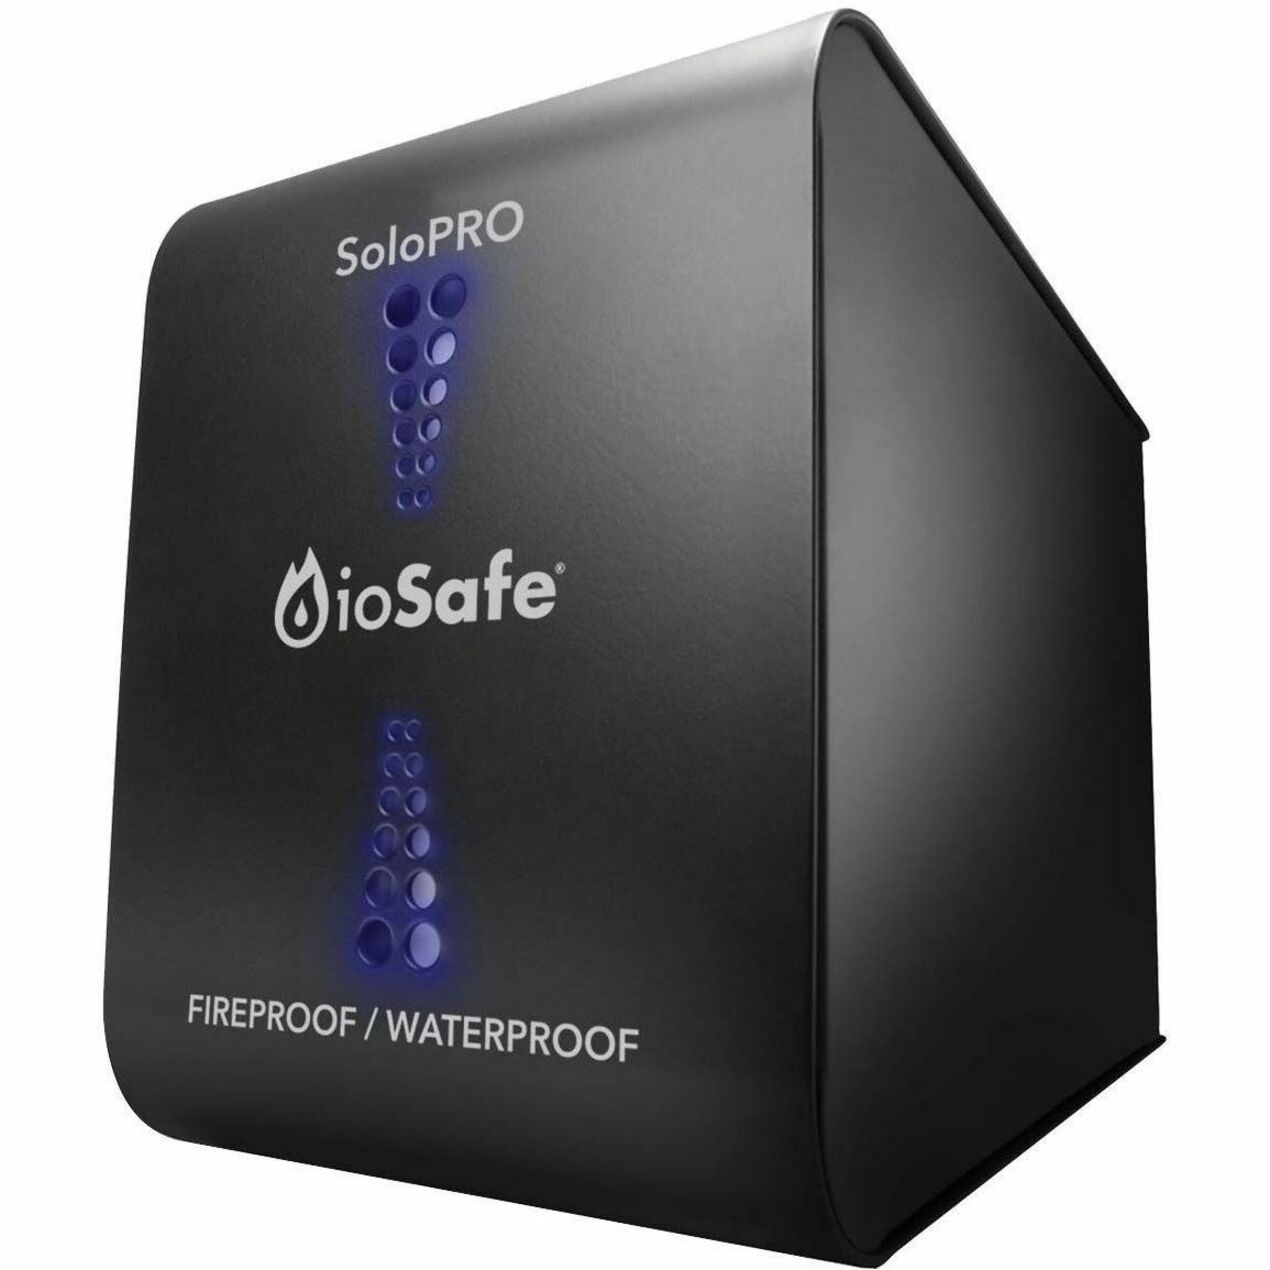 ioSafe SoloPRO External Hard Drive - 3TB Storage Capacity [Discontinued]